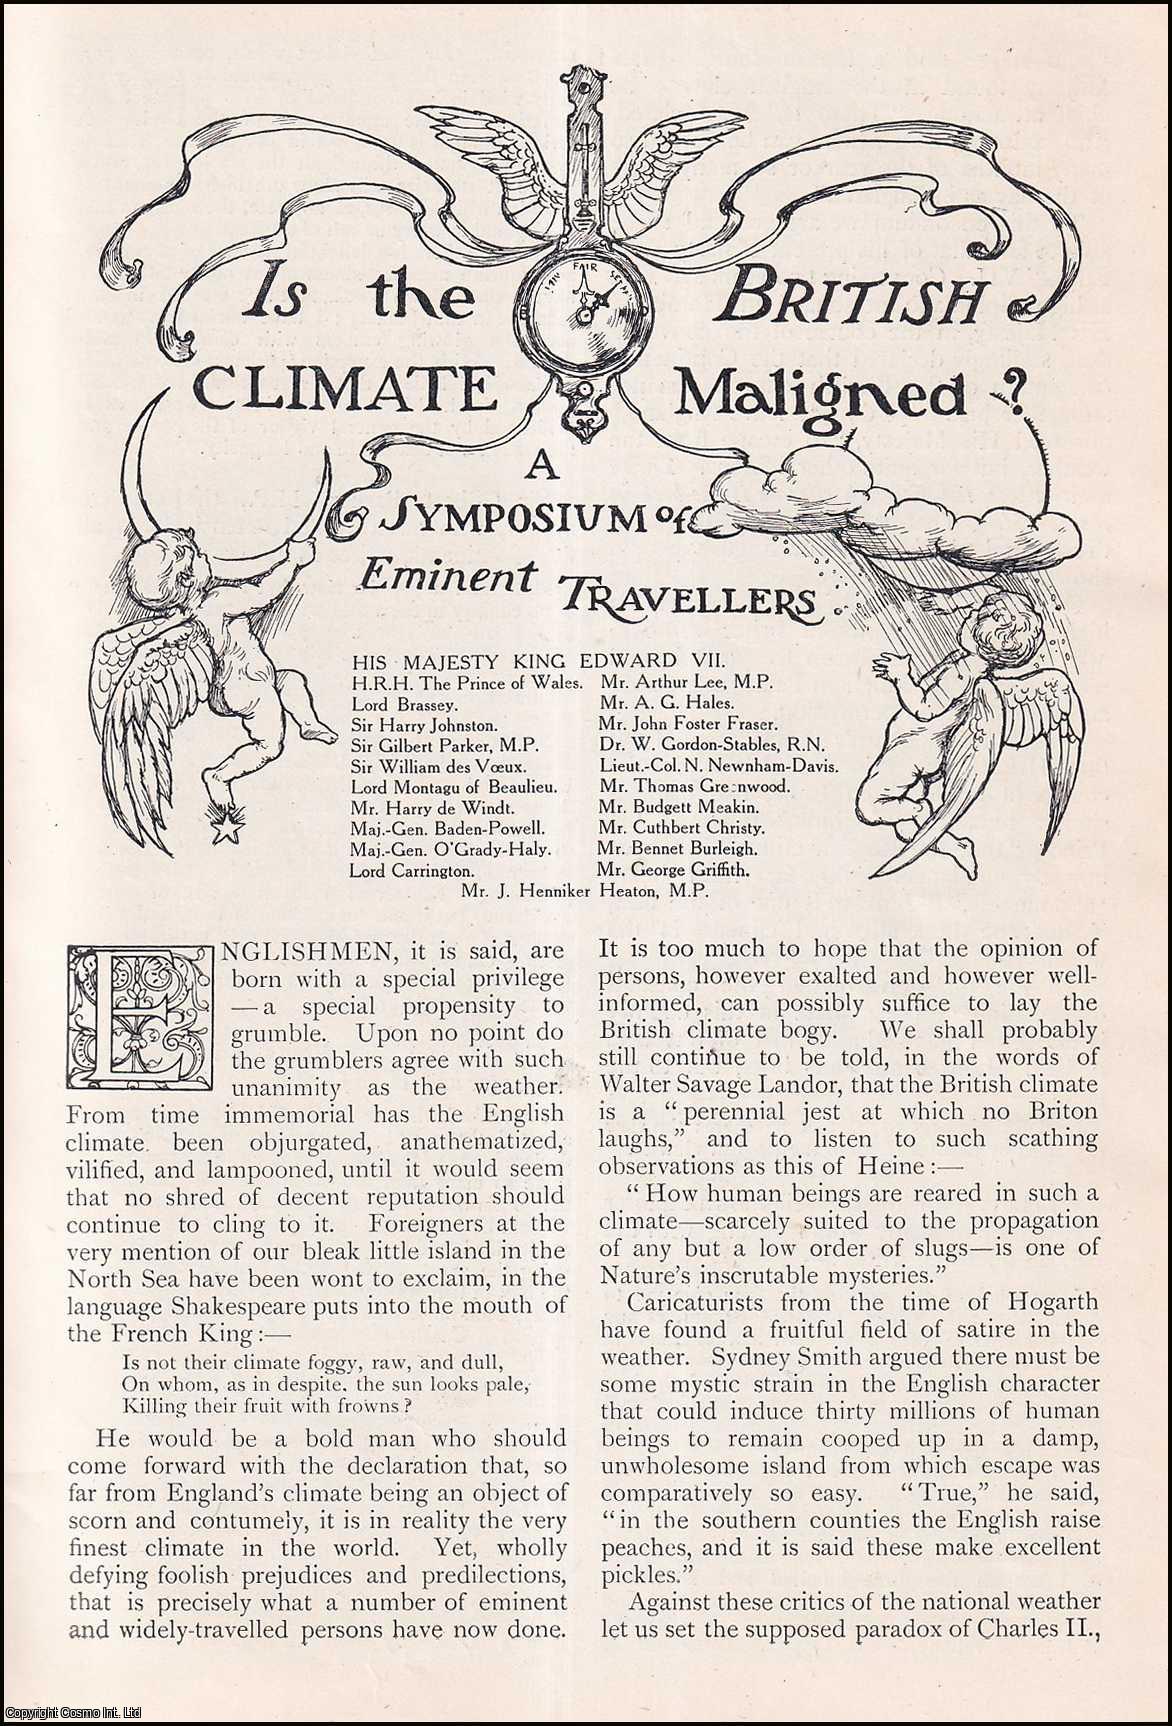 No Author Stated - Is the British Climate Maligned ? A Symposium of Eminent Travellers. An uncommon original article from The Strand Magazine, 1906.